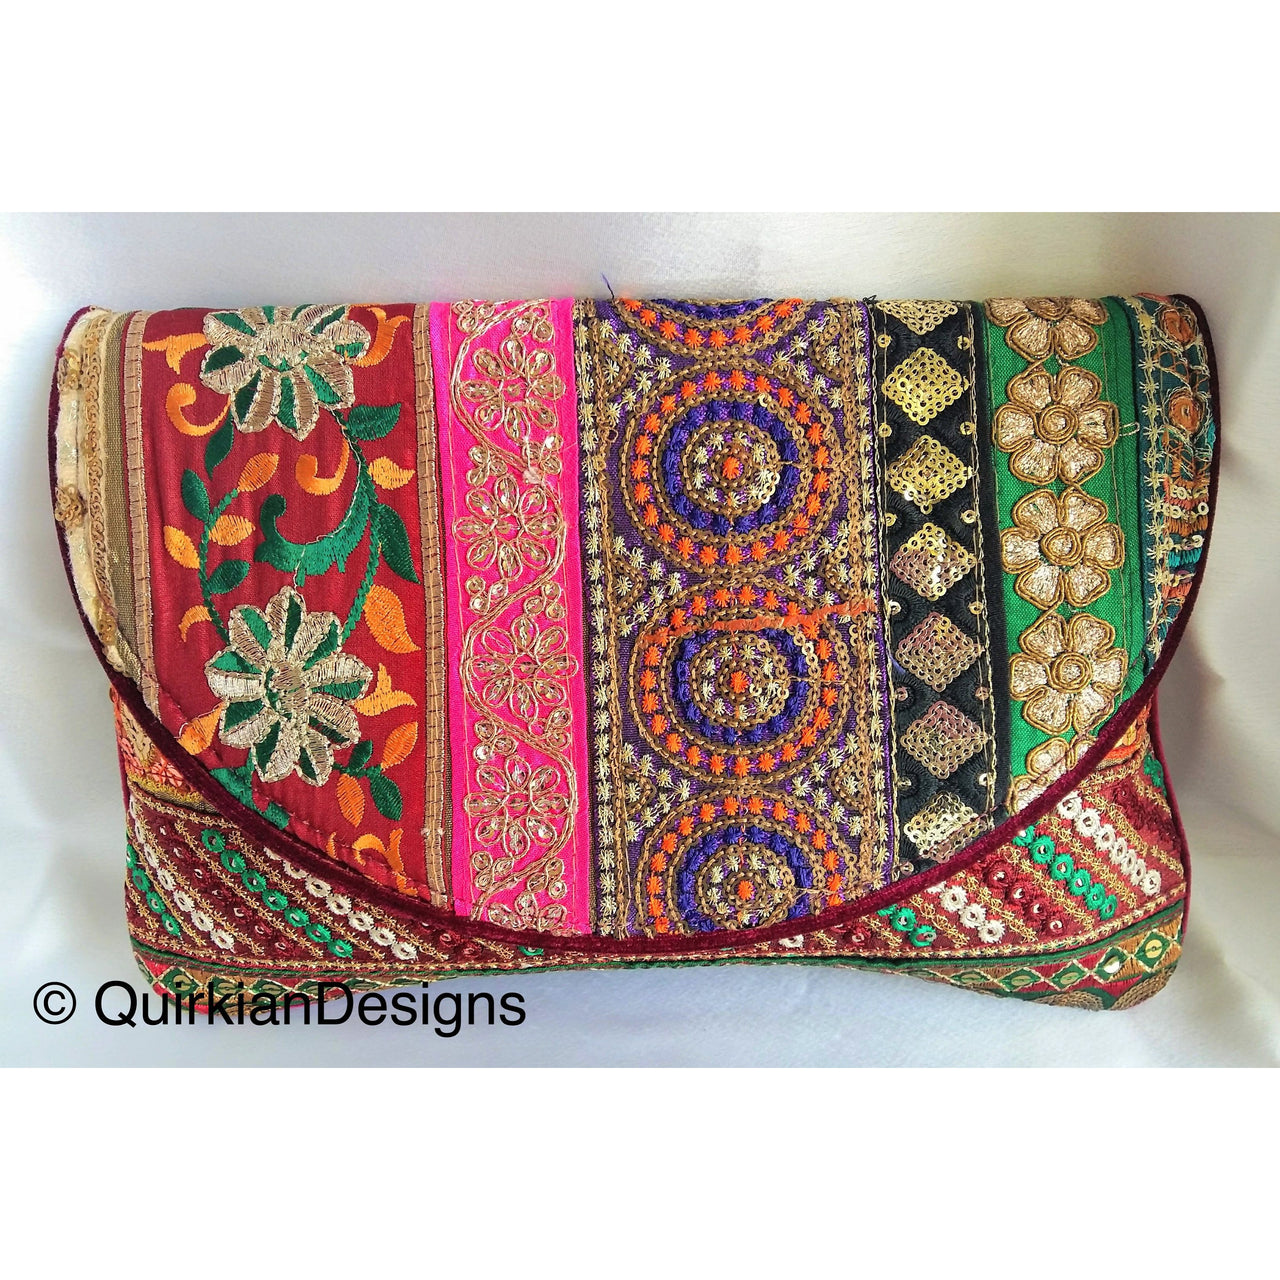 Maroon Red Velvet Fabric Clutch Purse With Red, Green, Yellow, Orange, Black, Pink And Gold Floral Embroidery, Wedding Clutch, Party Bag